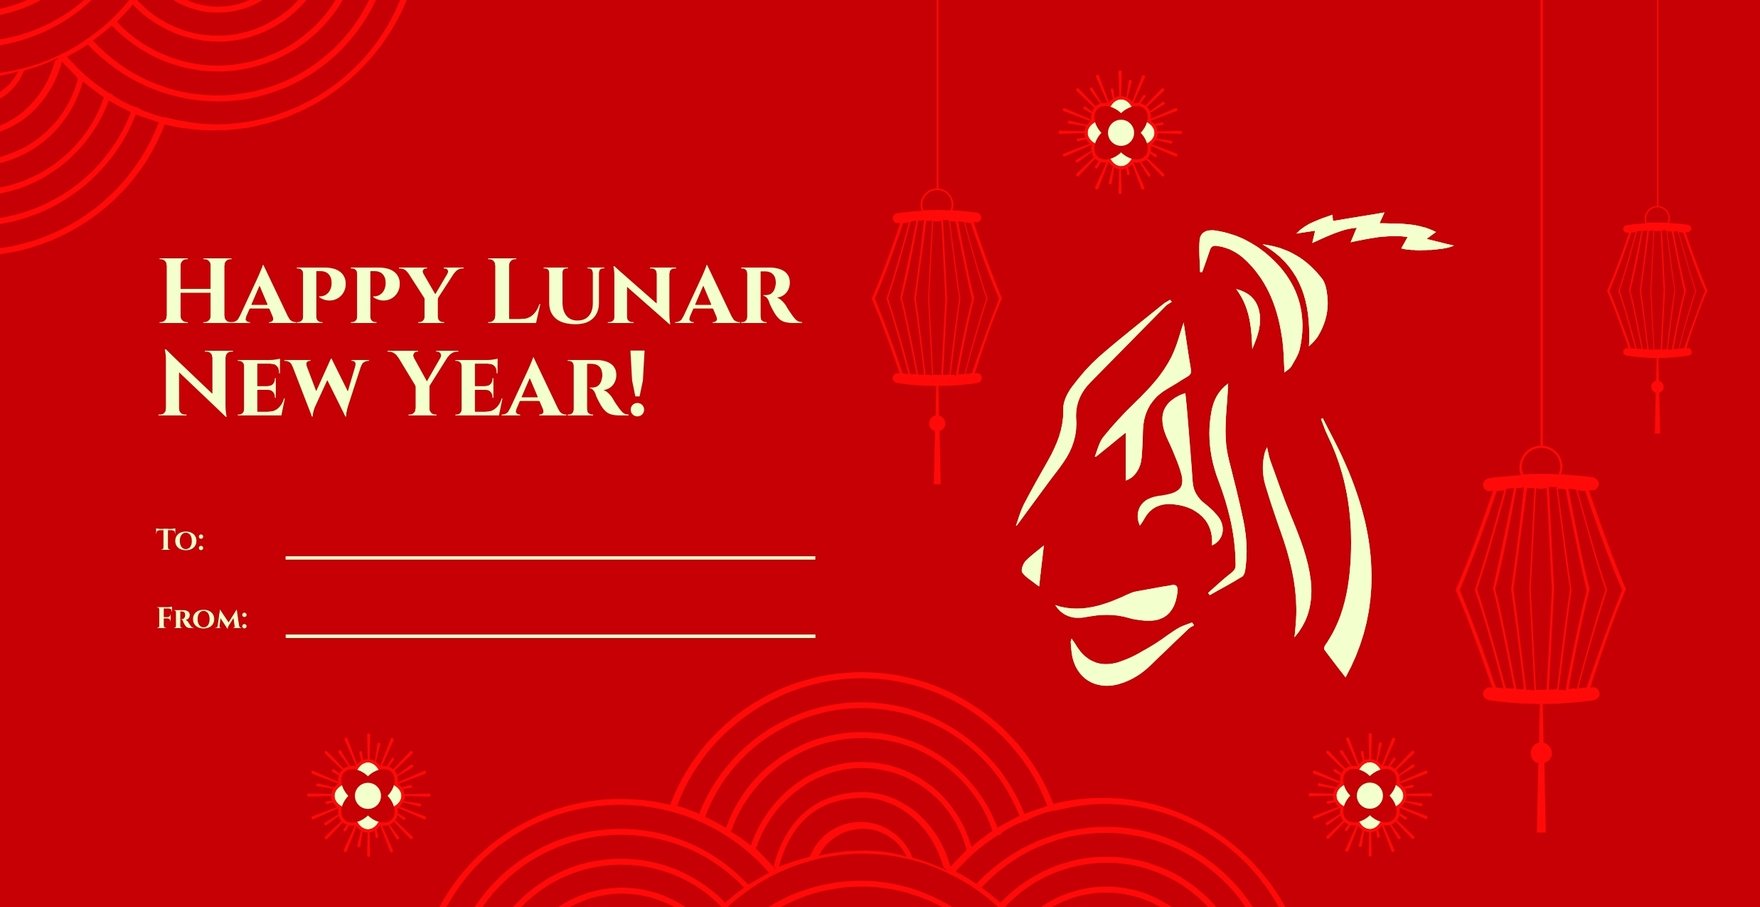 Lunar New Year Gift Card Template